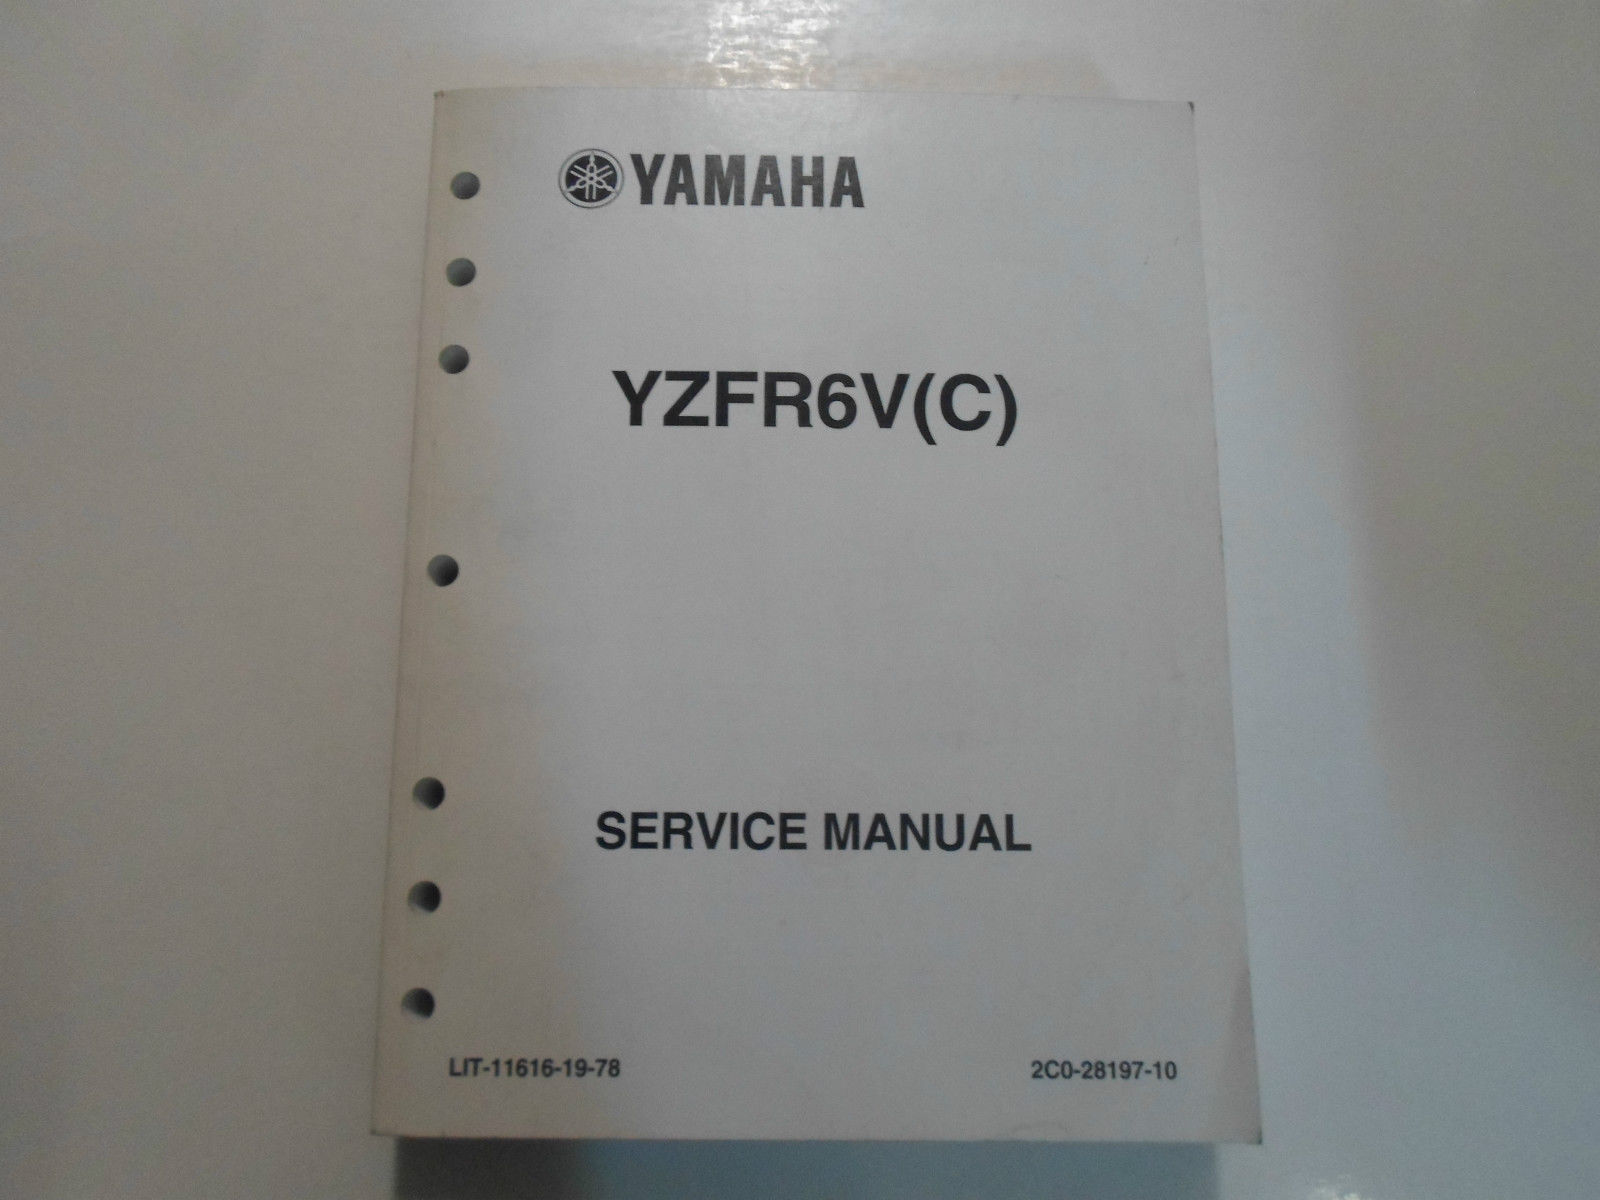 Primary image for 2006 06 Yamaha YZFR6V (C) YZFR6V Motorcycle Service SHOP Repair Manual OEM